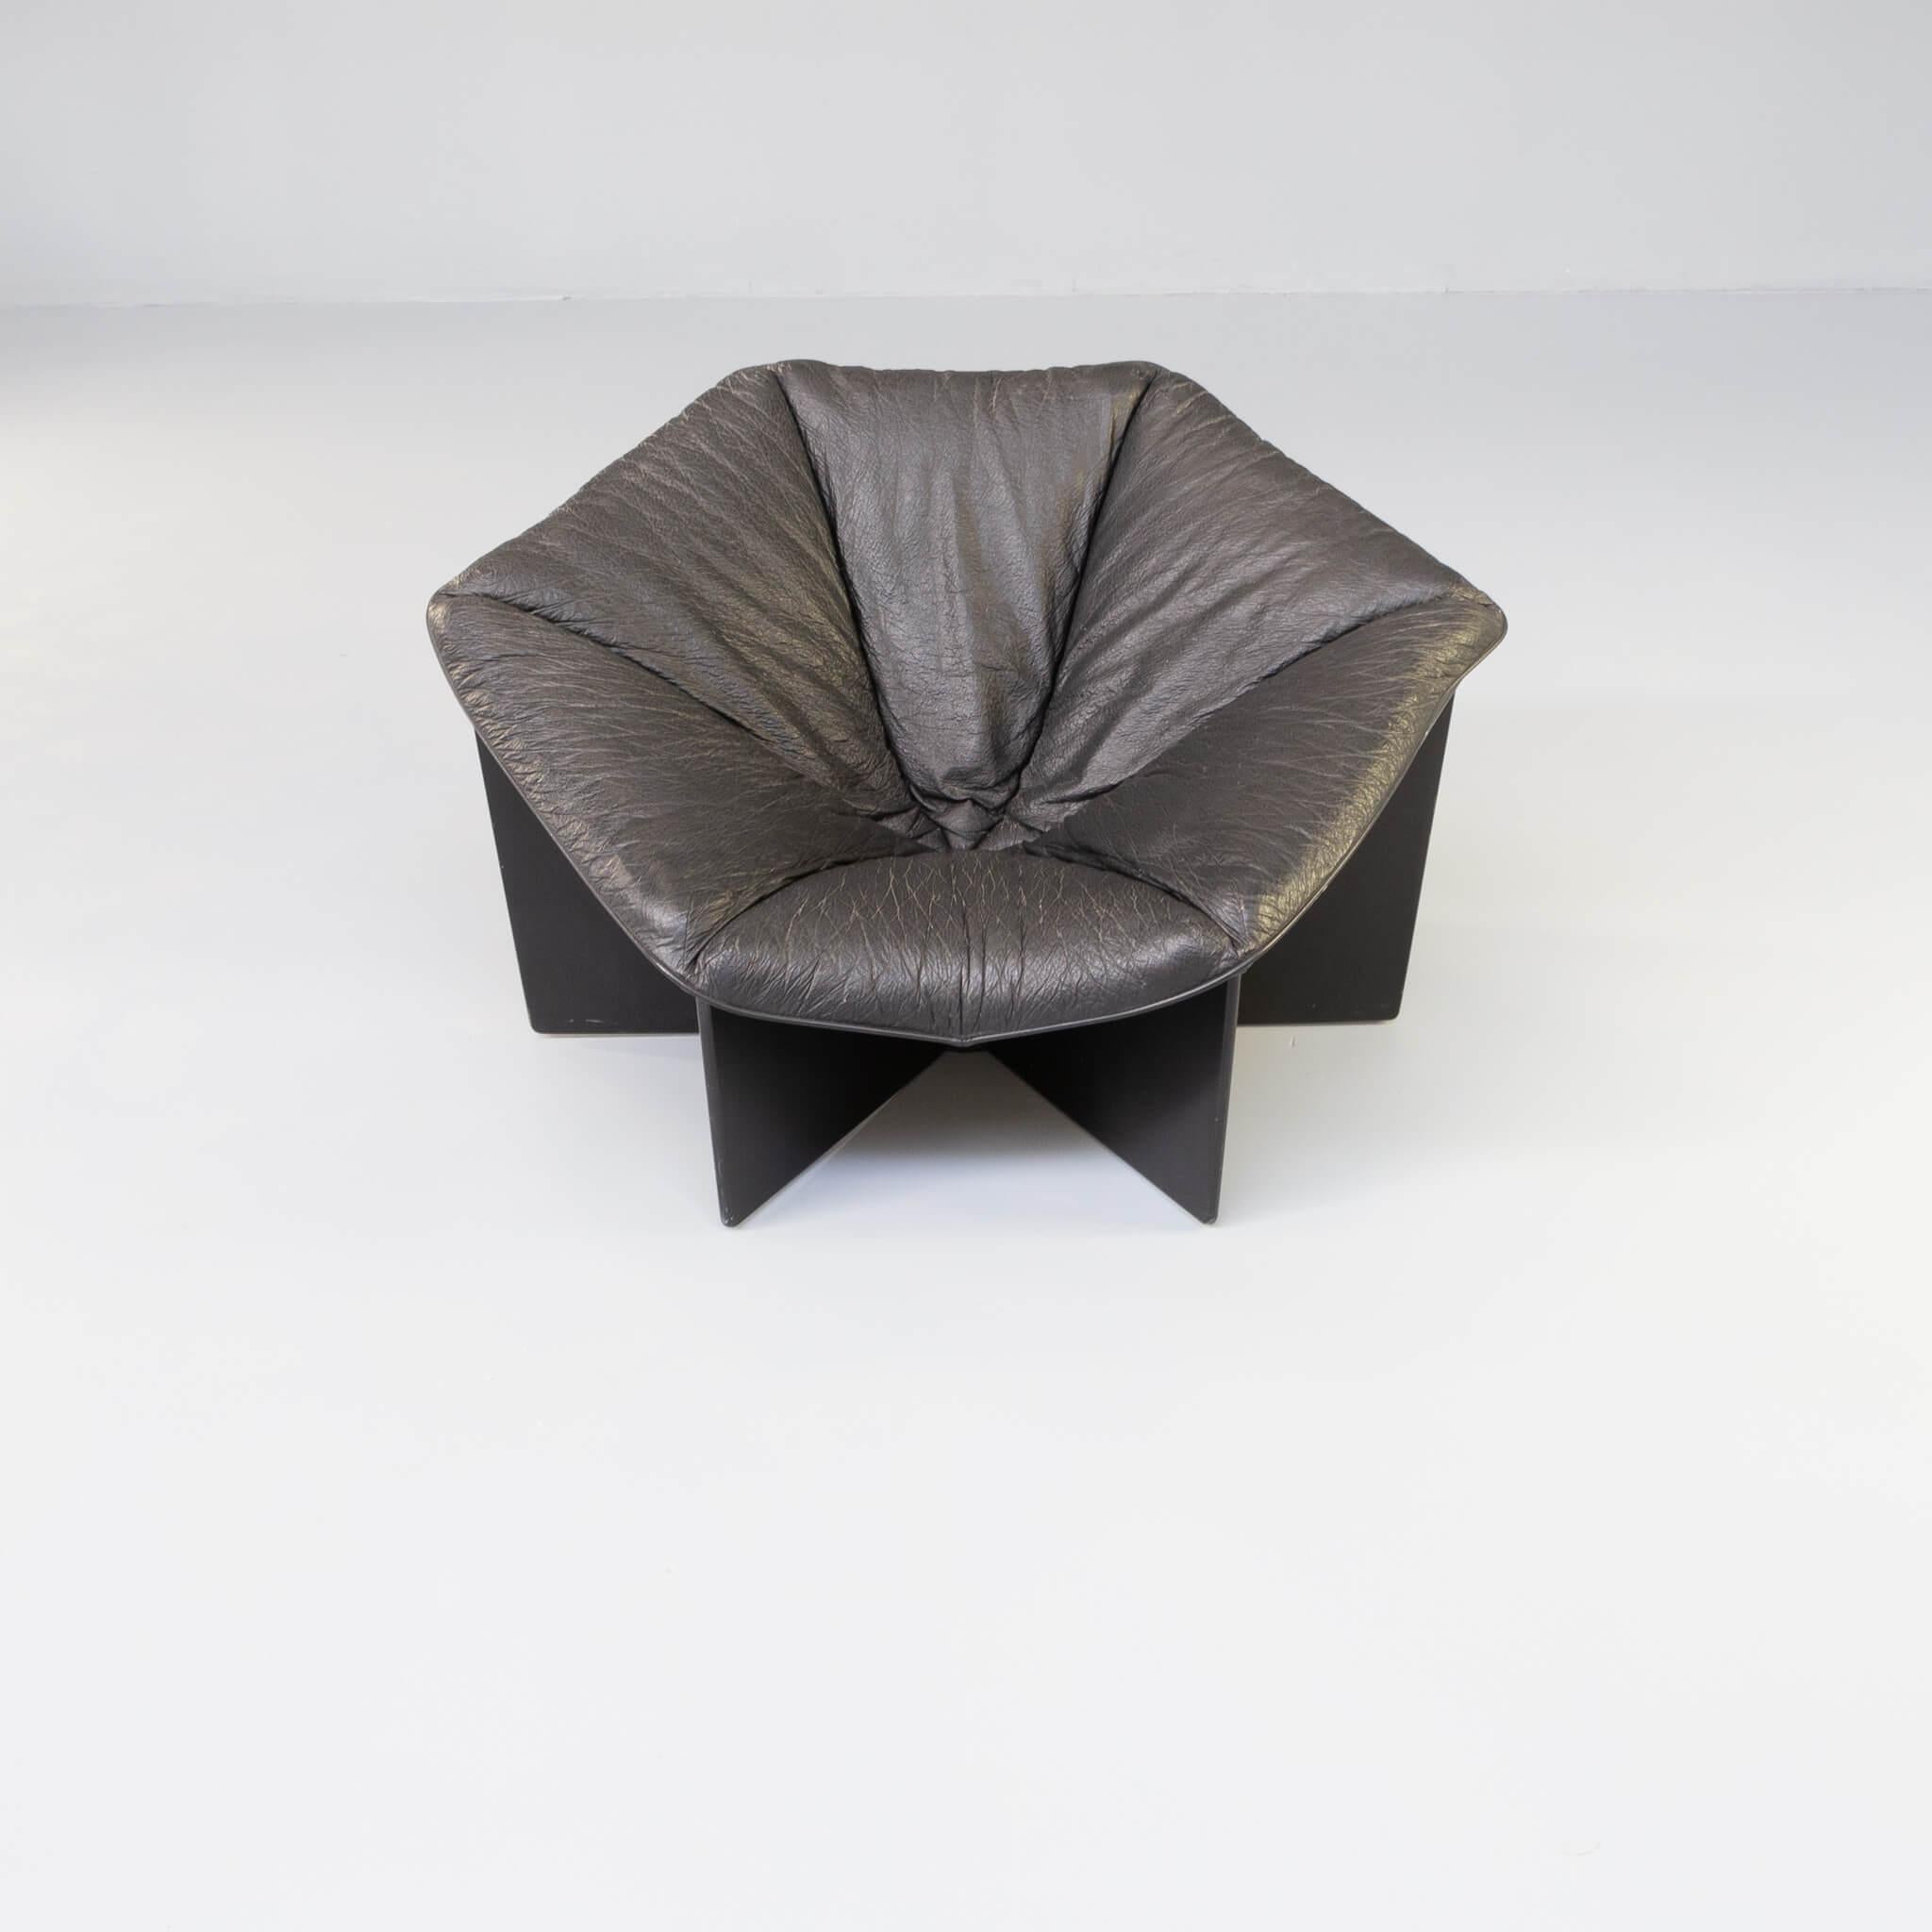 20th Century Pierre Paulin F687 Spider fauteuil for Artifort set/2